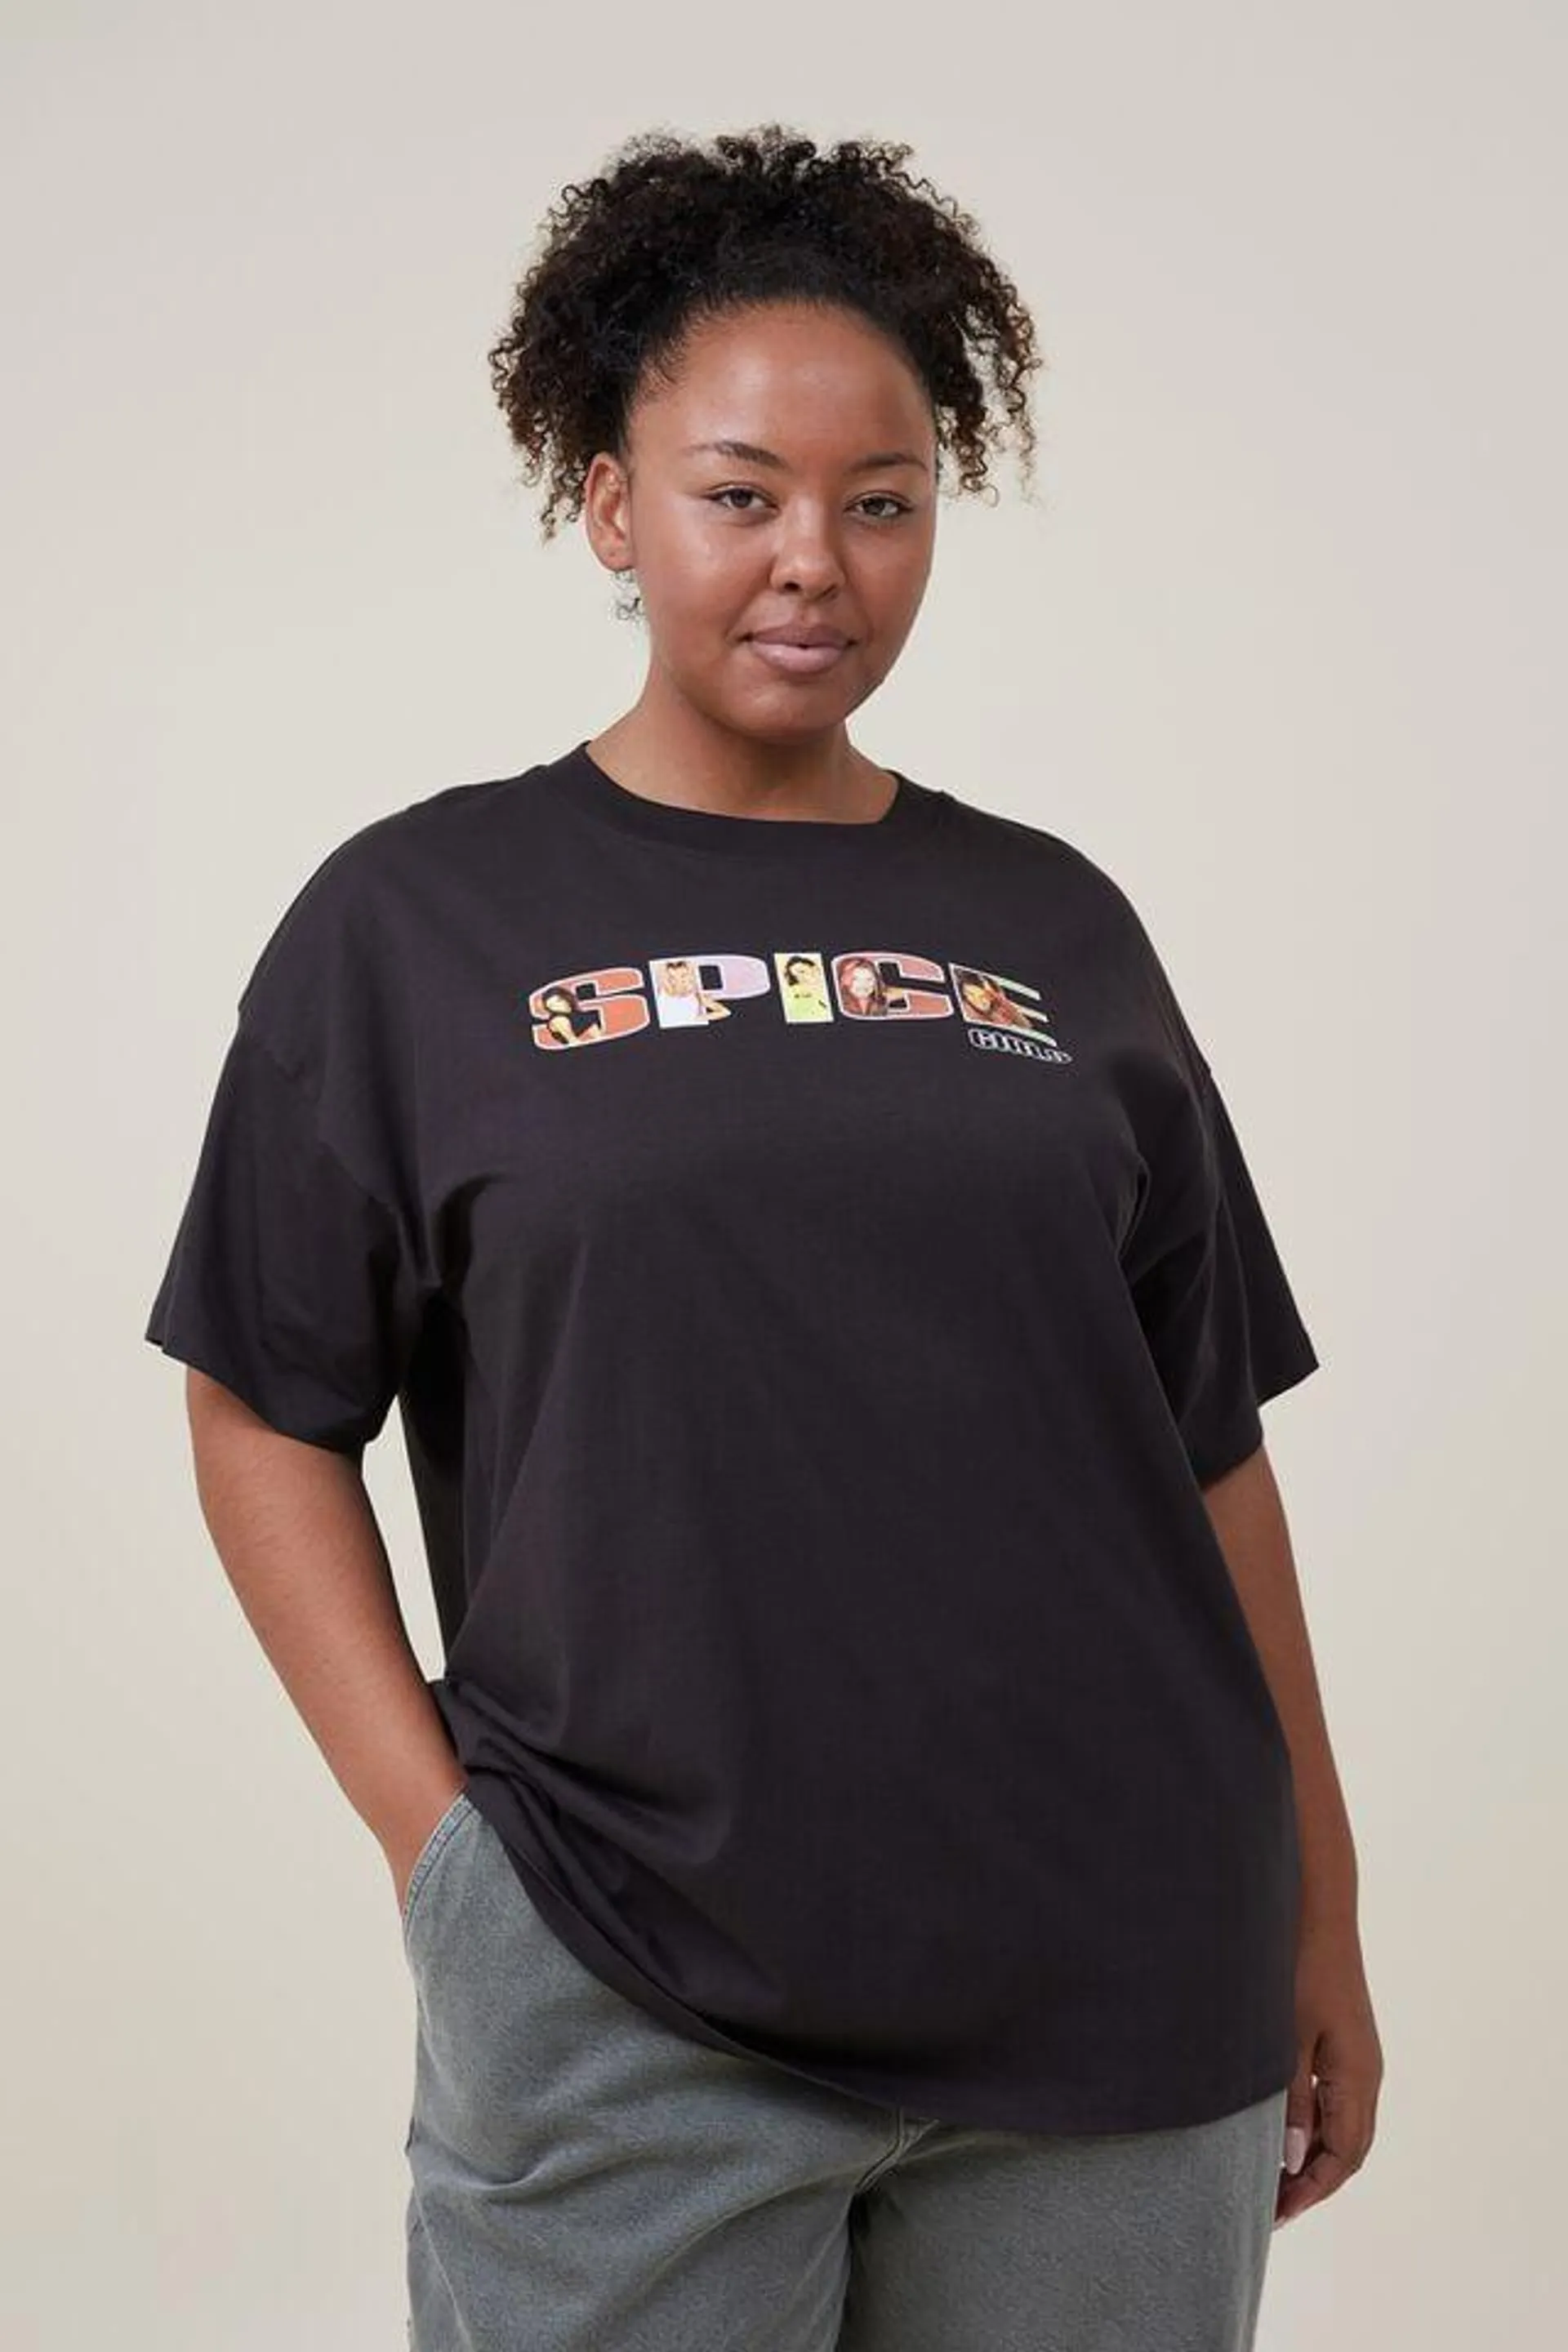 Special Edition Spice Girls Tee